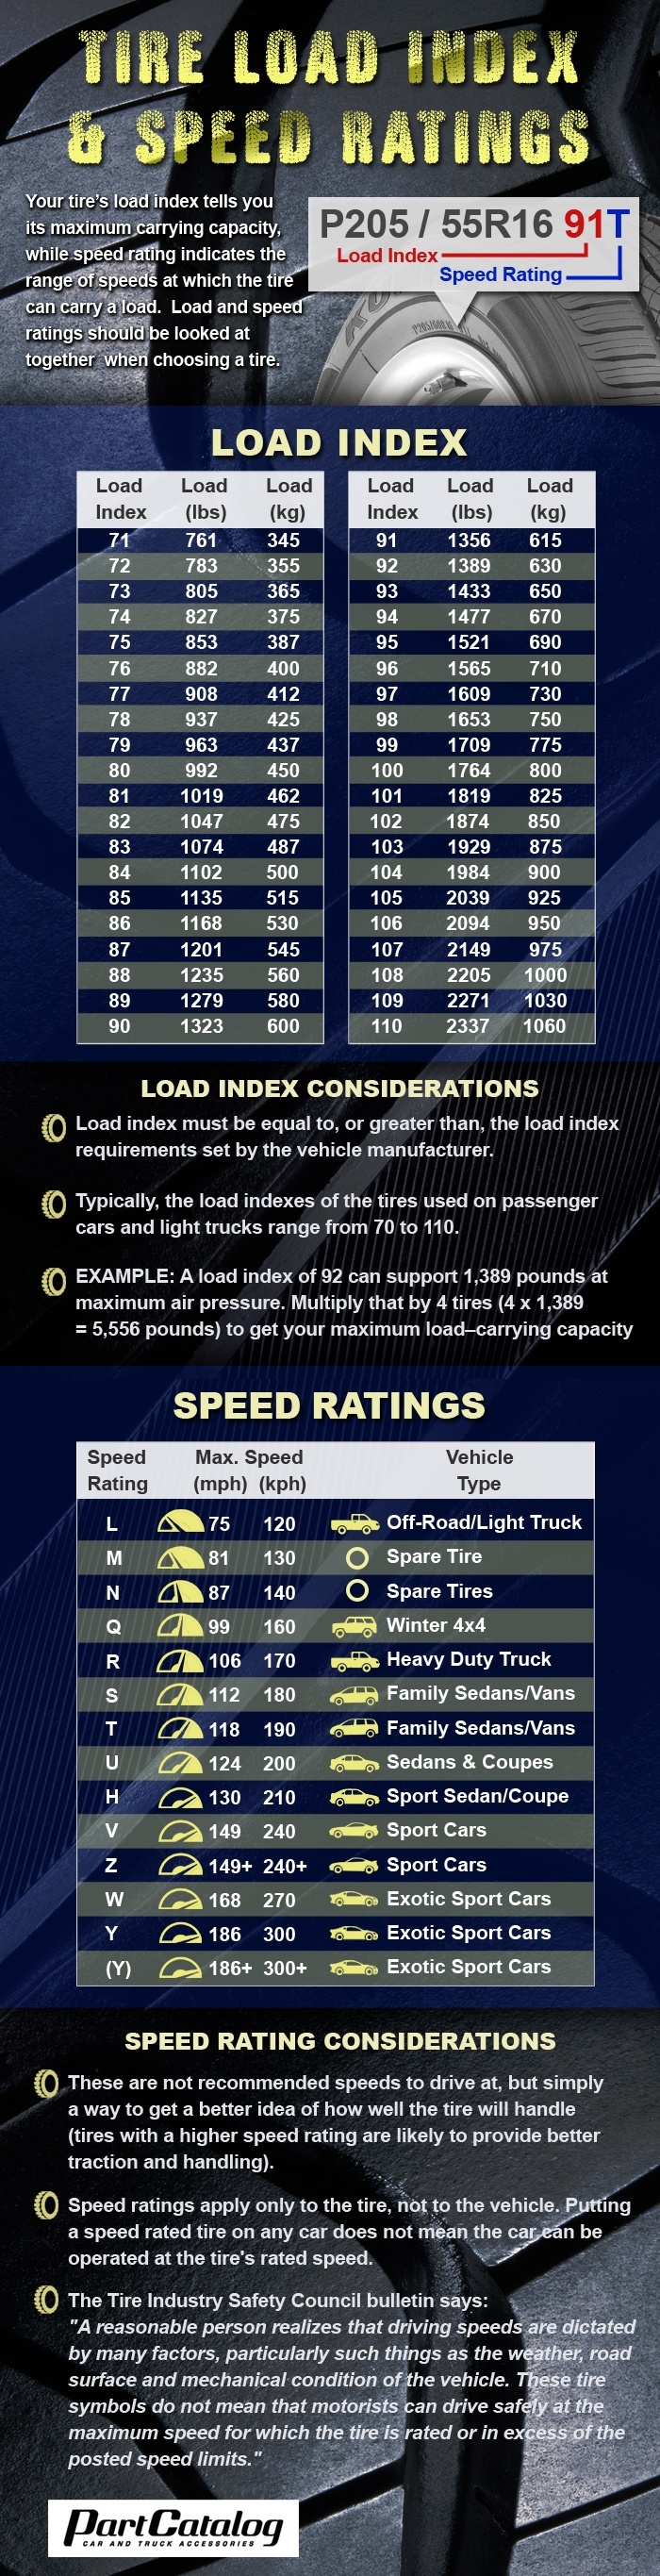 Tire Load Index and Speed Ratings